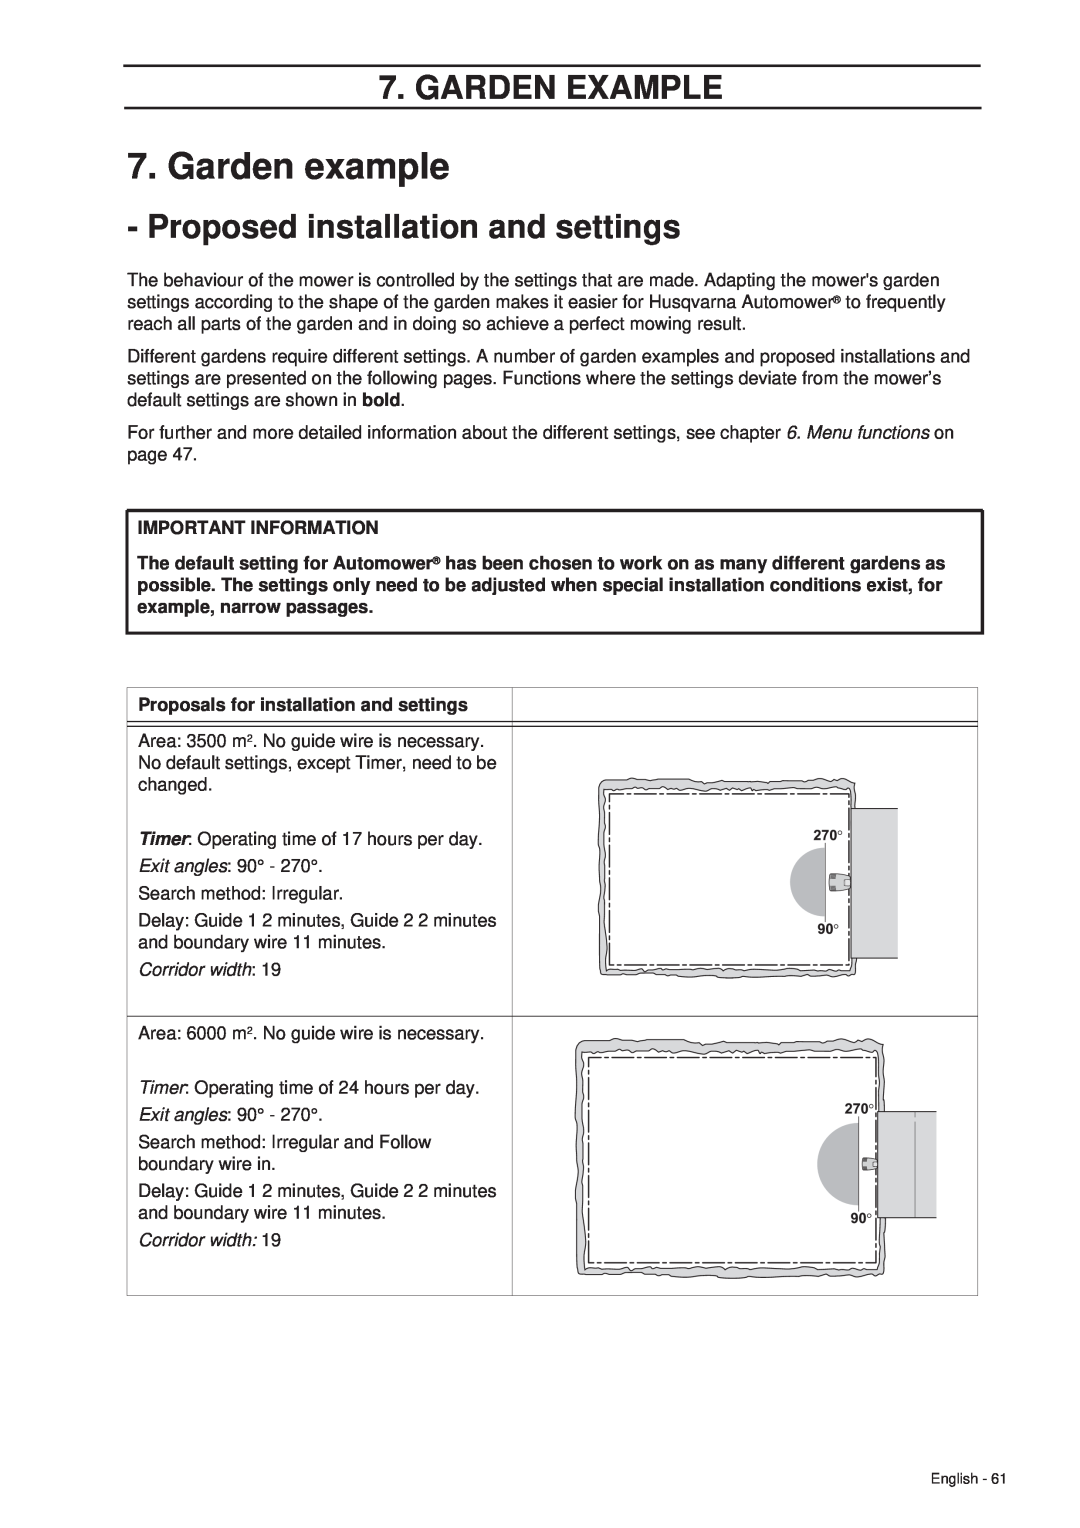 Husqvarna 265 ACX manual Garden example, Garden Example, Proposals for installation and settings, Important Information 